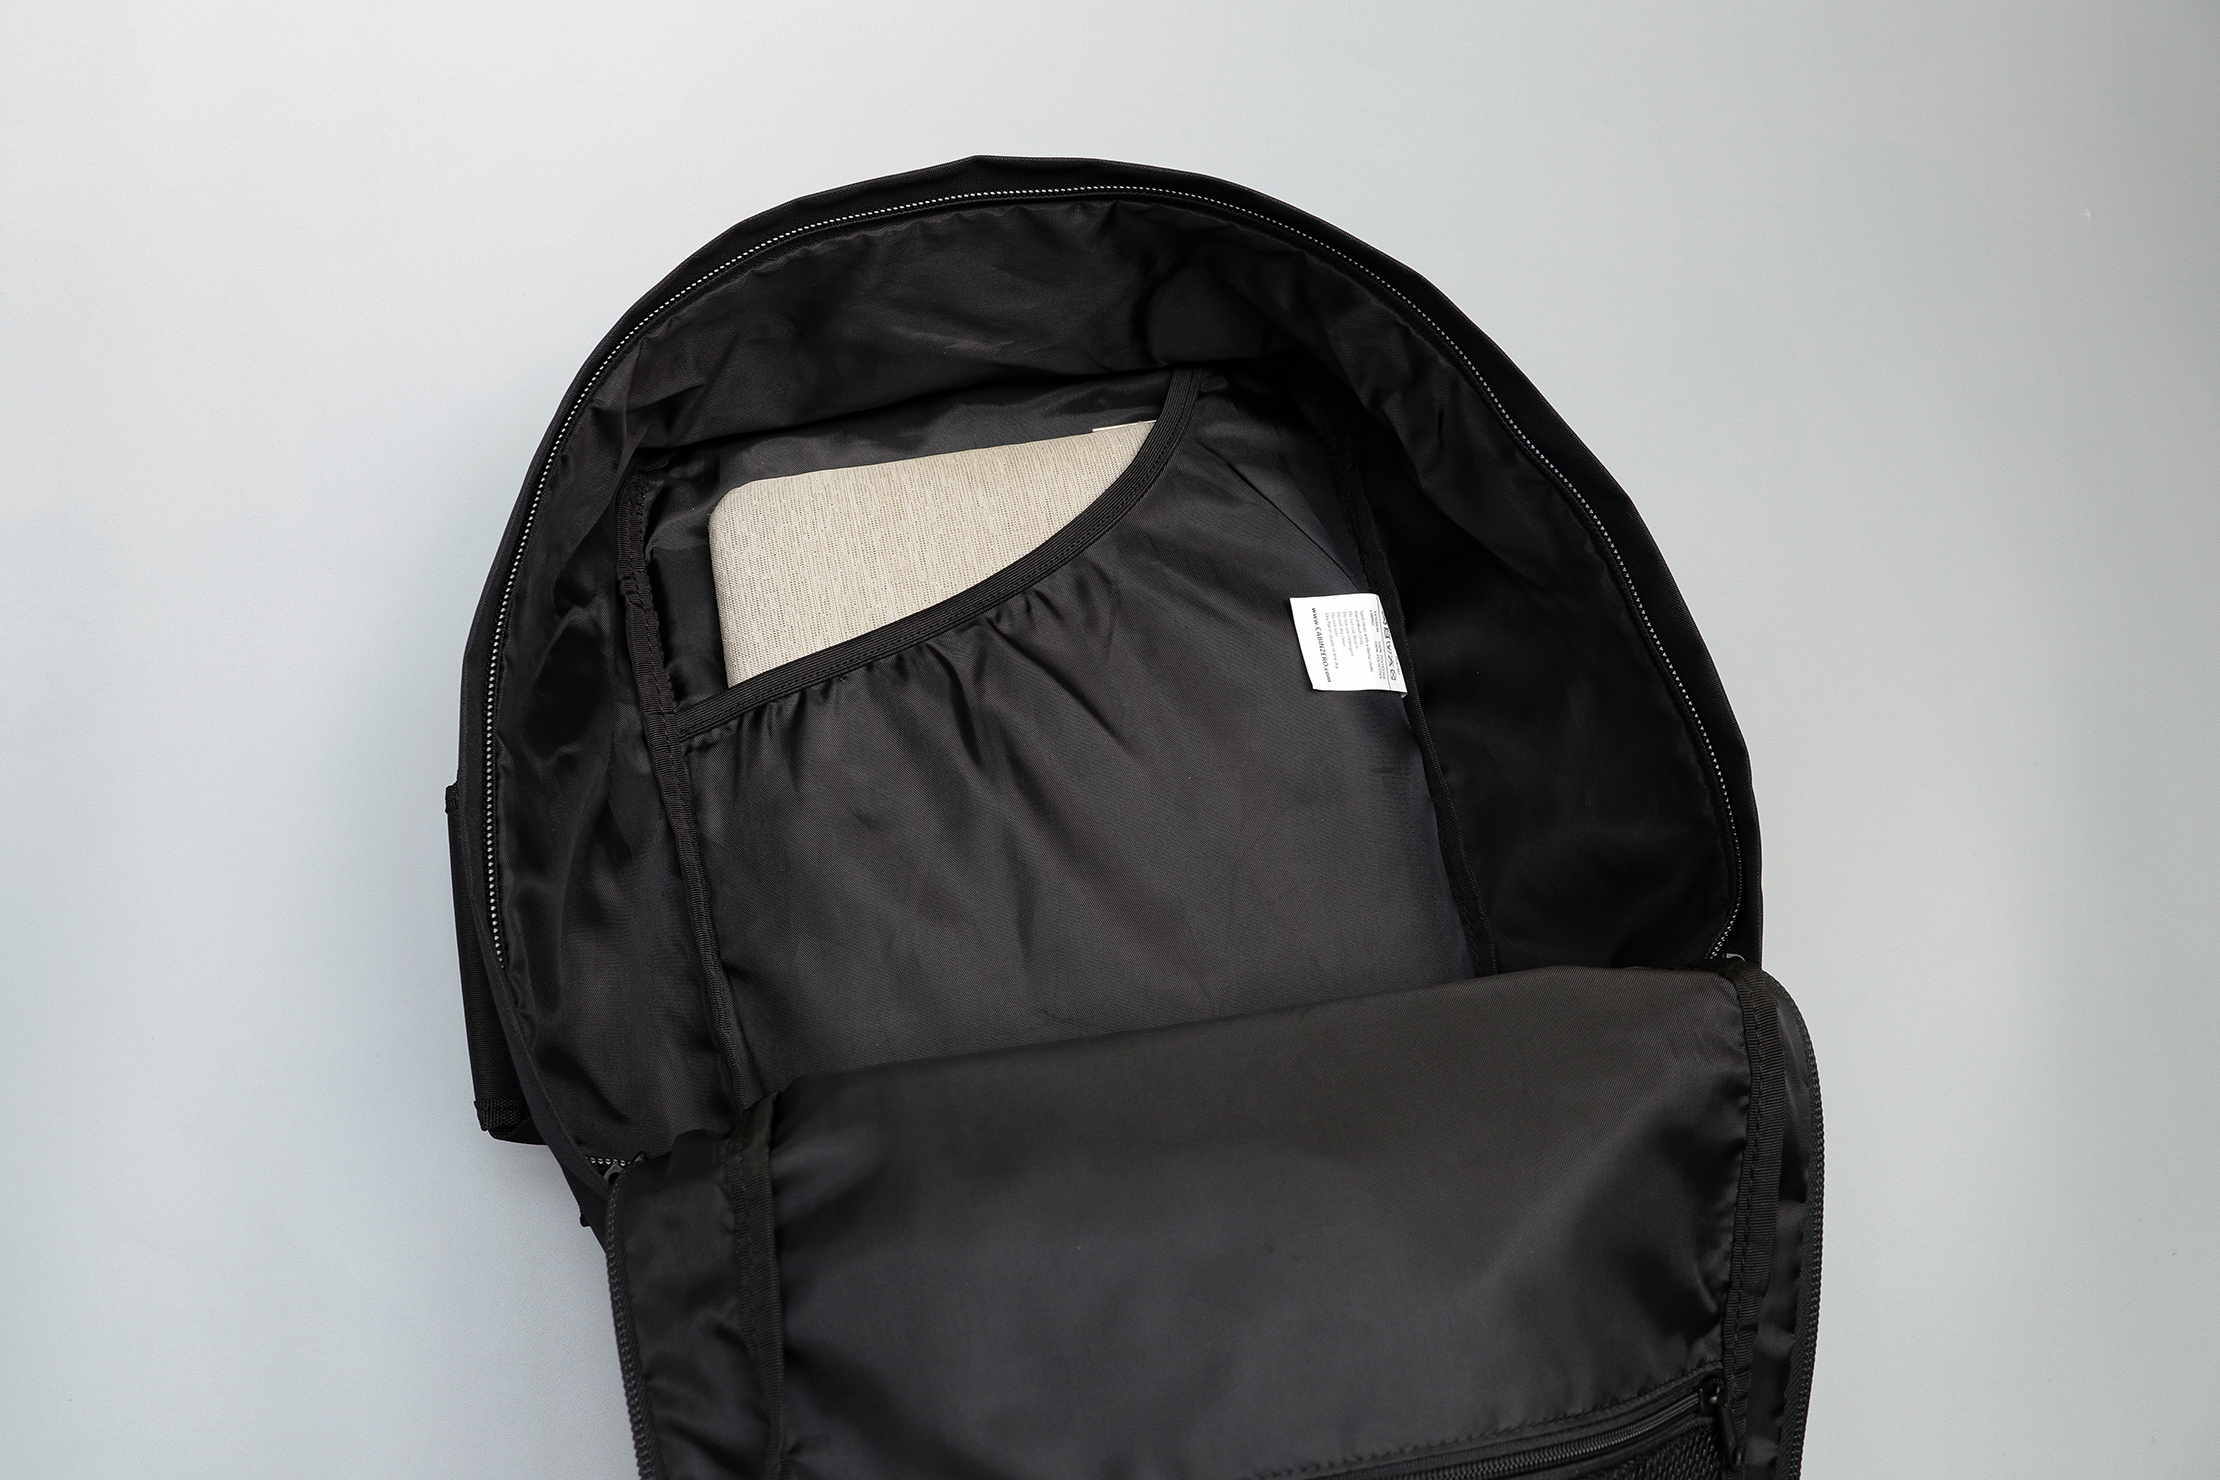 CabinZero Backpack Review — The Savvy Backpacker